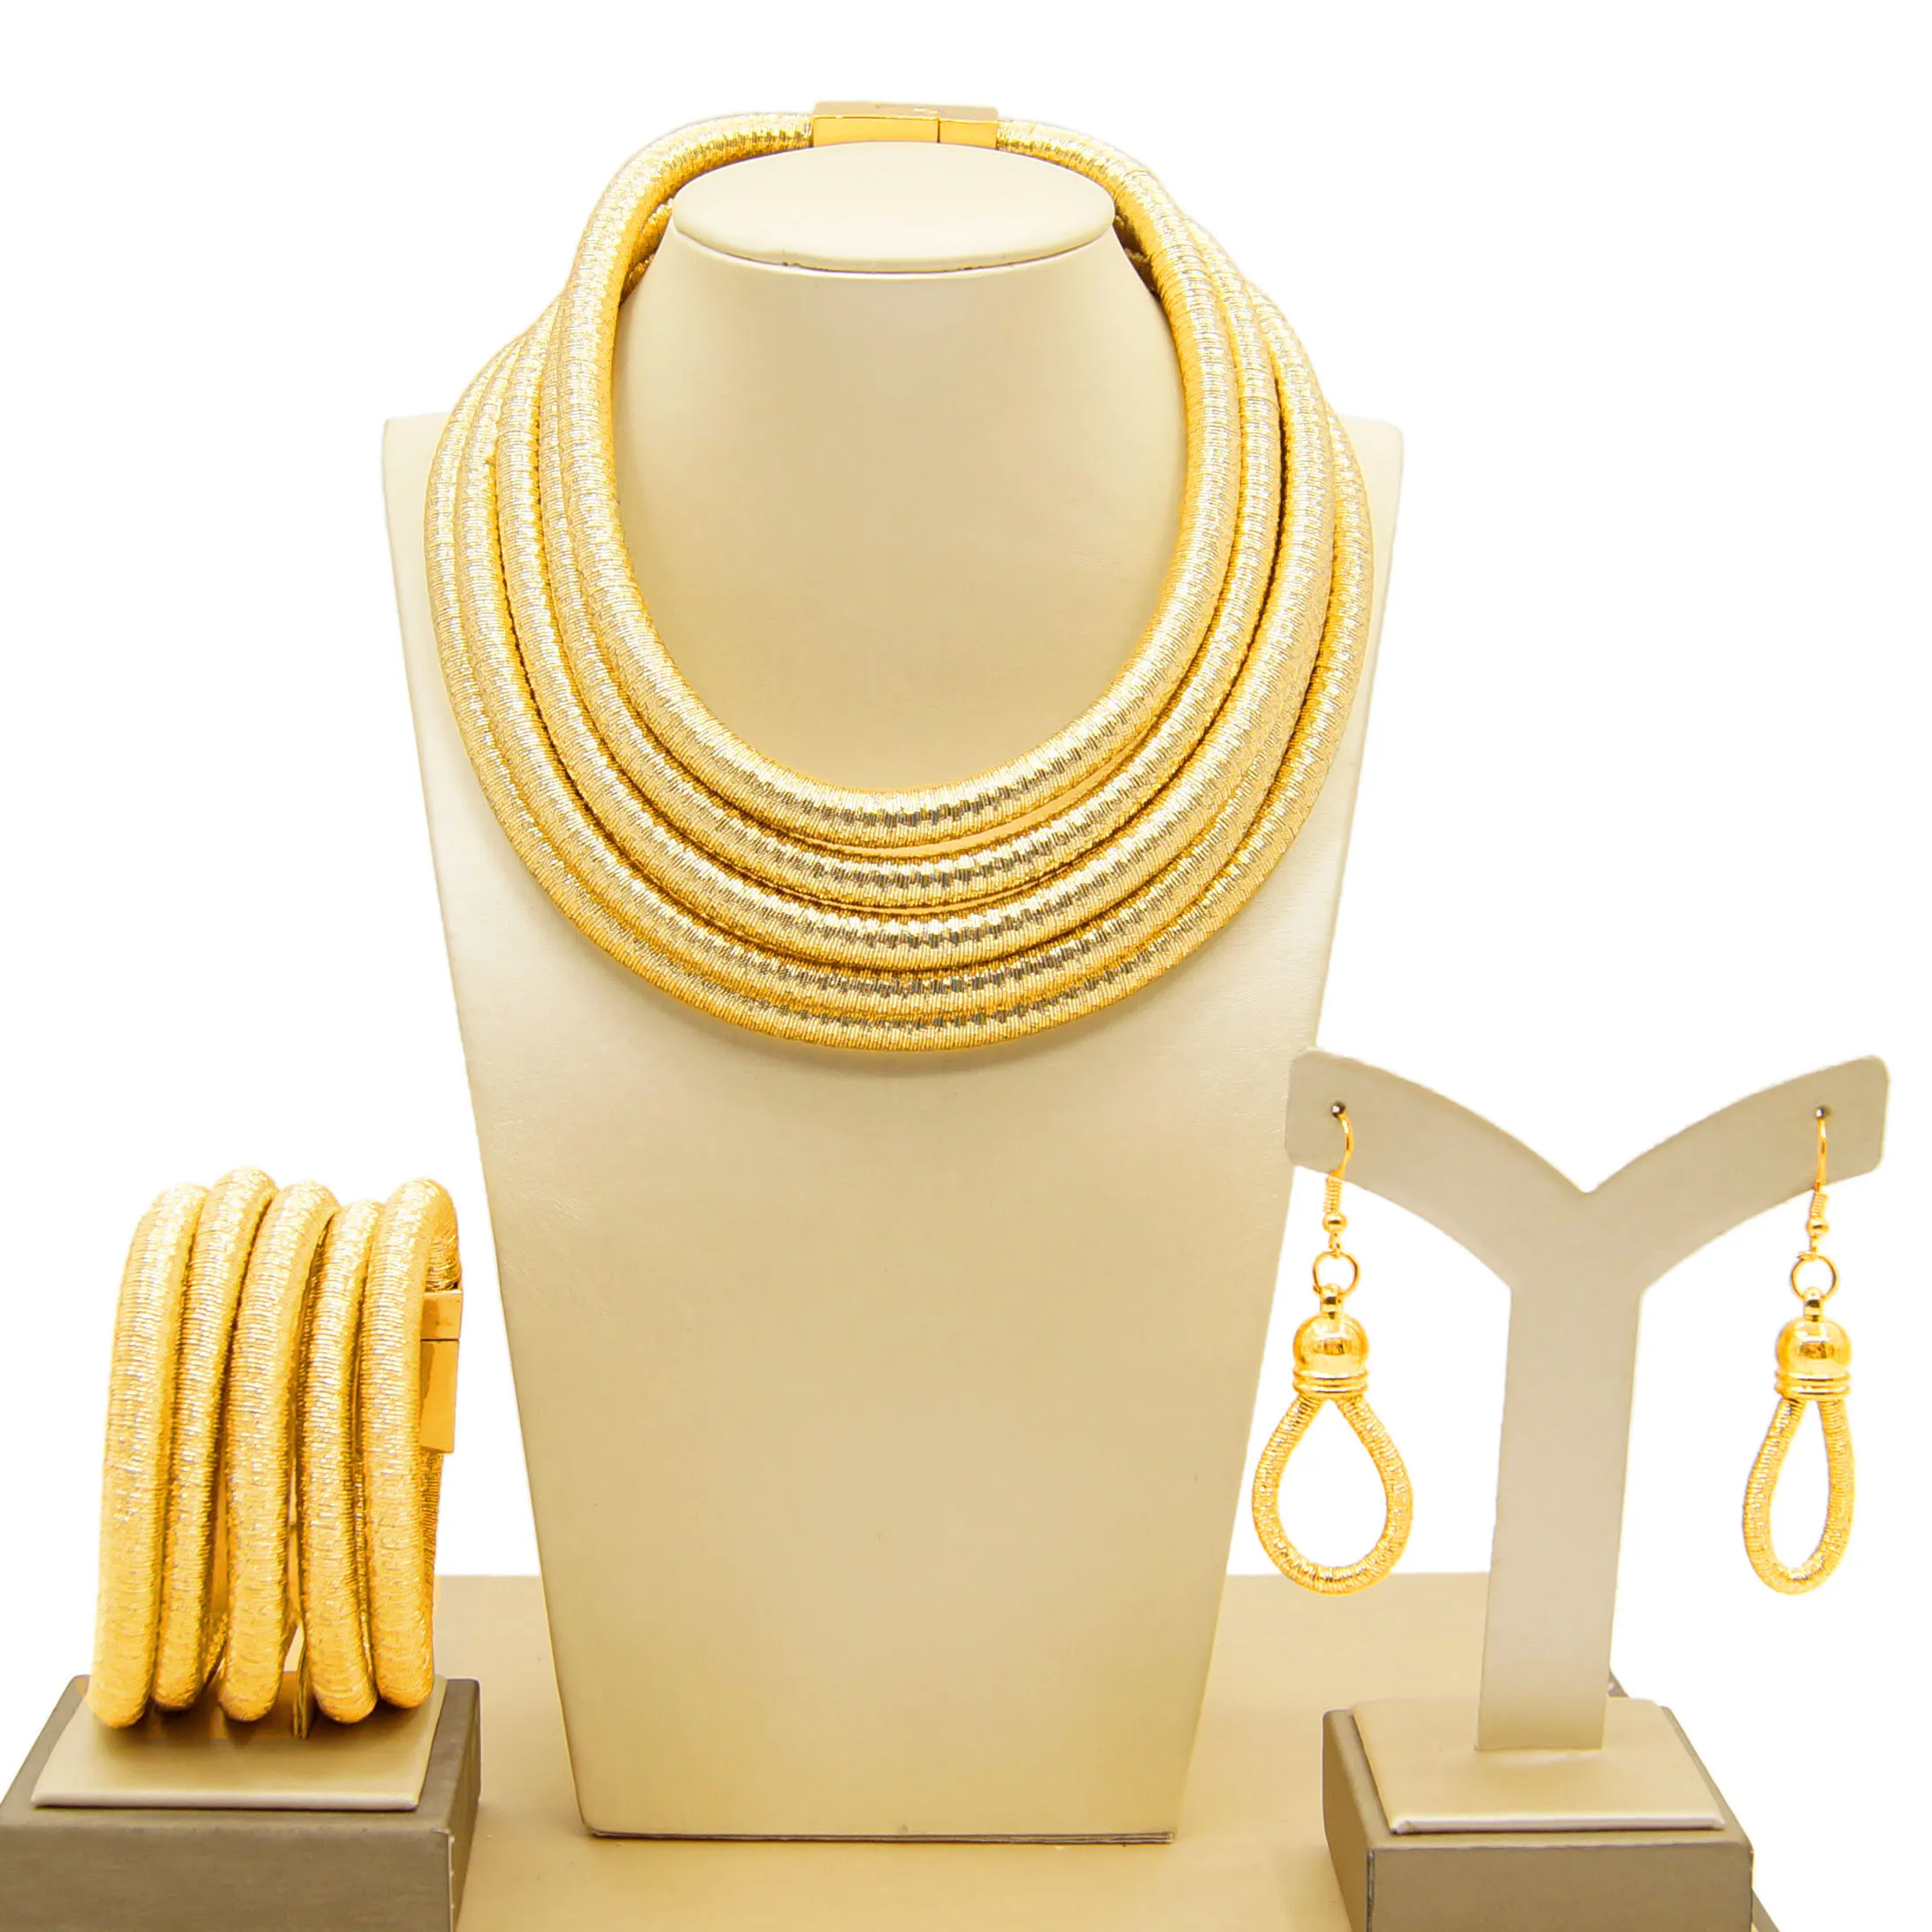 

Yulaili Wholesale Fashion Jewelry Set Brighter Collar Design Gold Jewelry For Women Anniversary Party Birthday Gift New Design